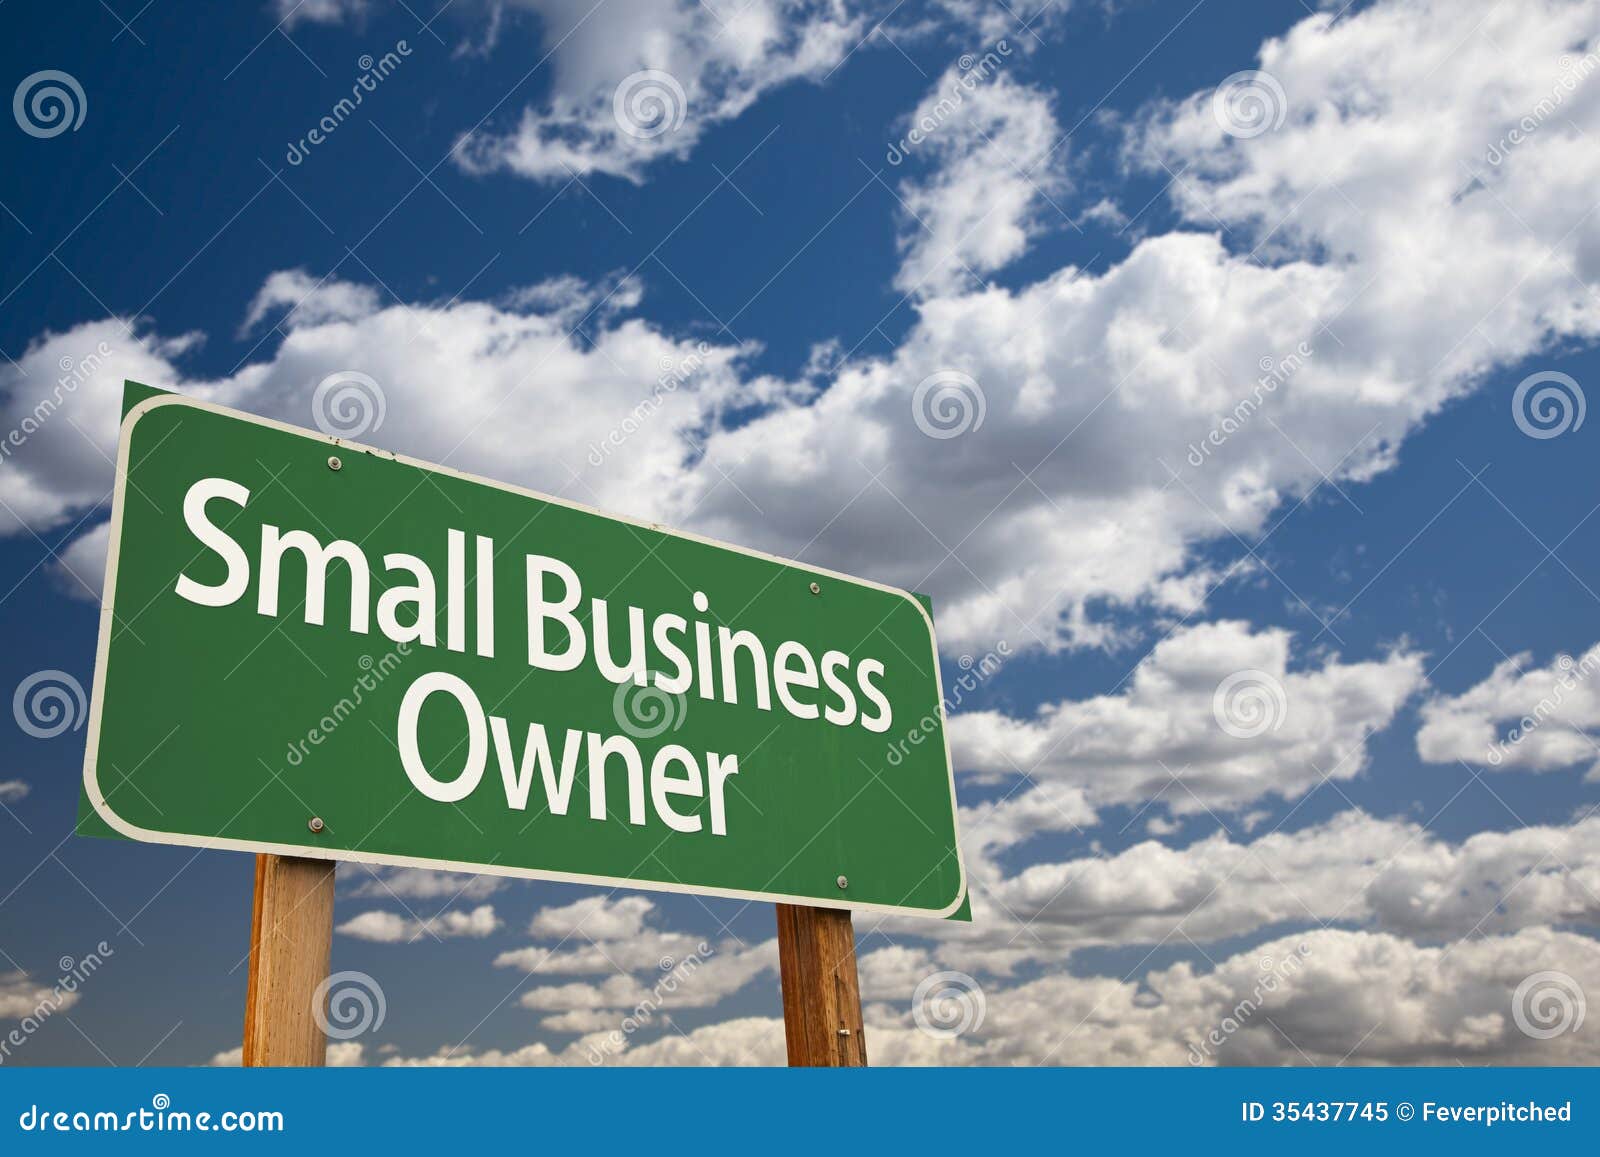 small business owner green road sign and clouds